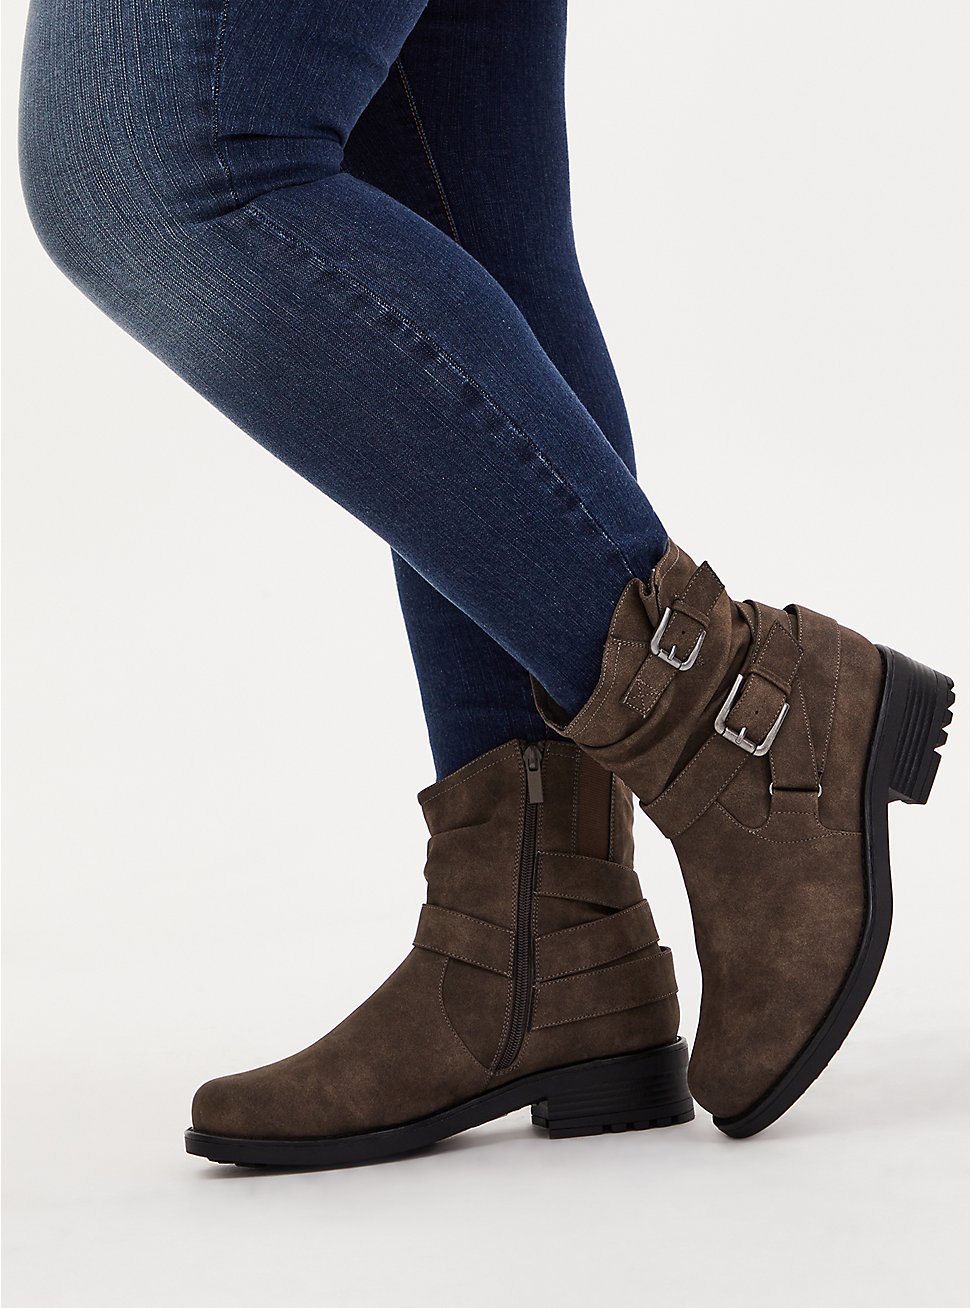 Plus Size - Dark Taupe Faux Leather Double Buckle Moto Boot (WW) - Torrid